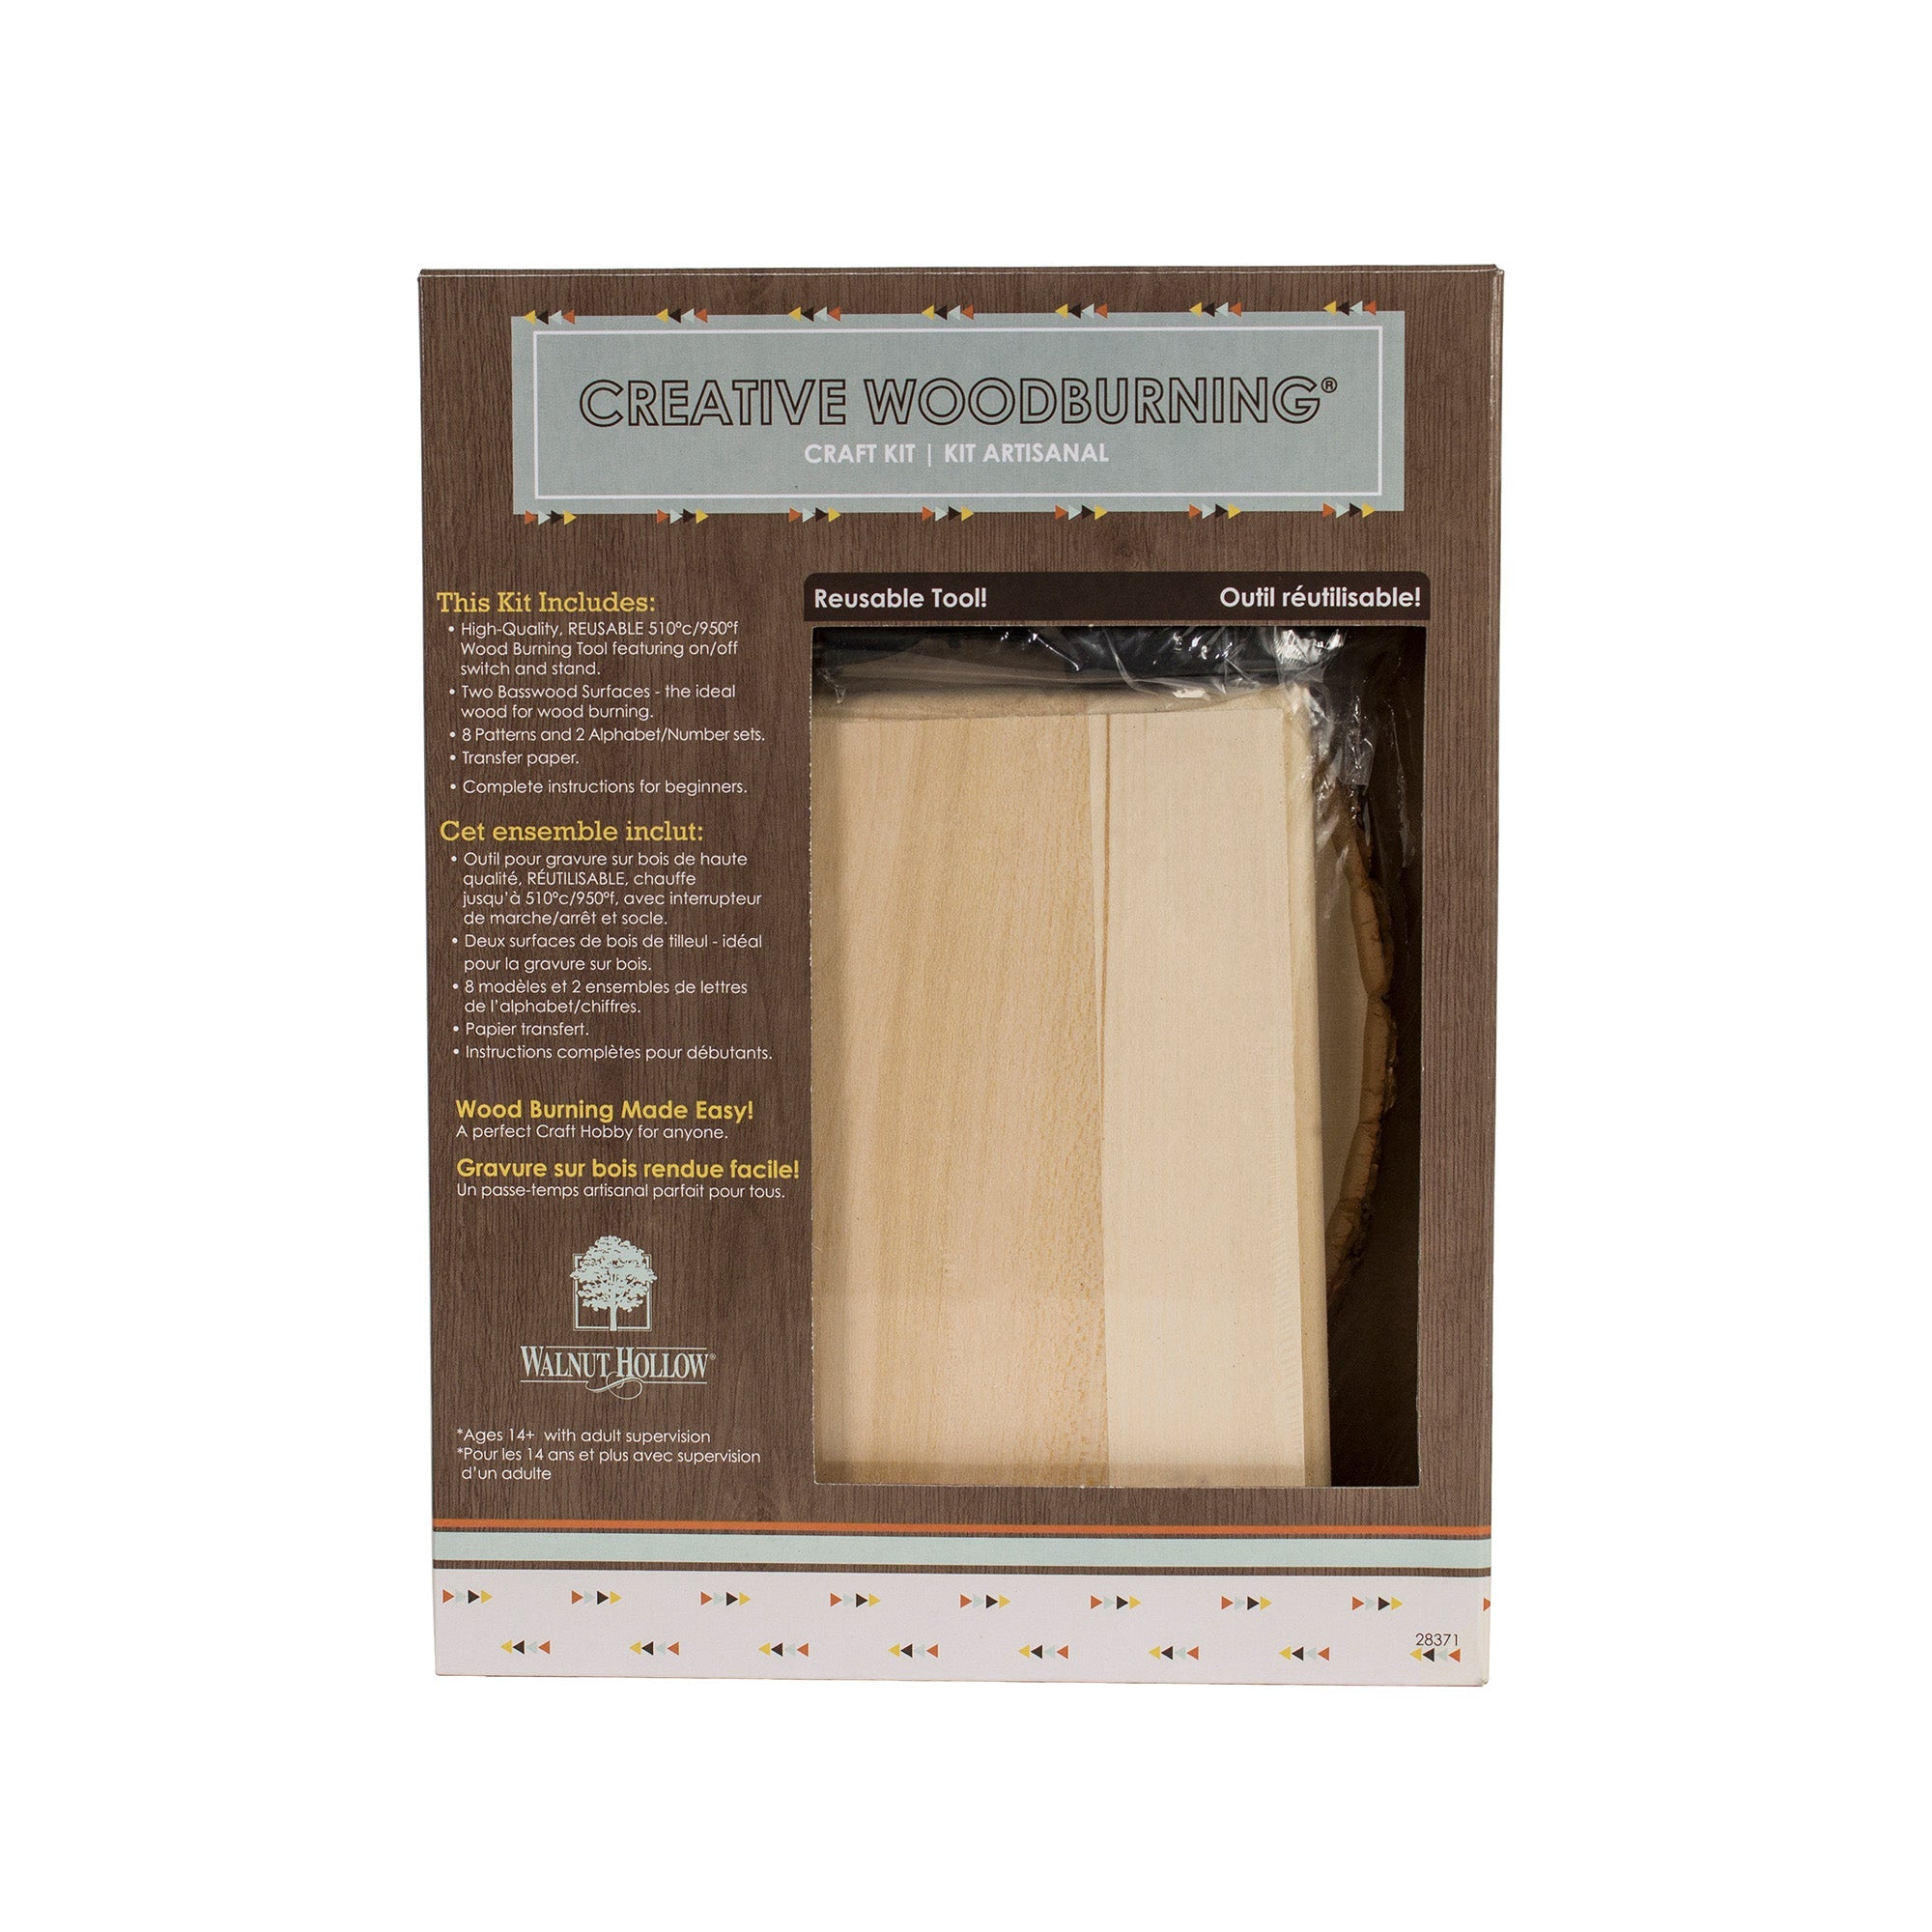 Woodburning Pen Multi Pack Point Set by Walnut Hollow – Viking Woodcrafts